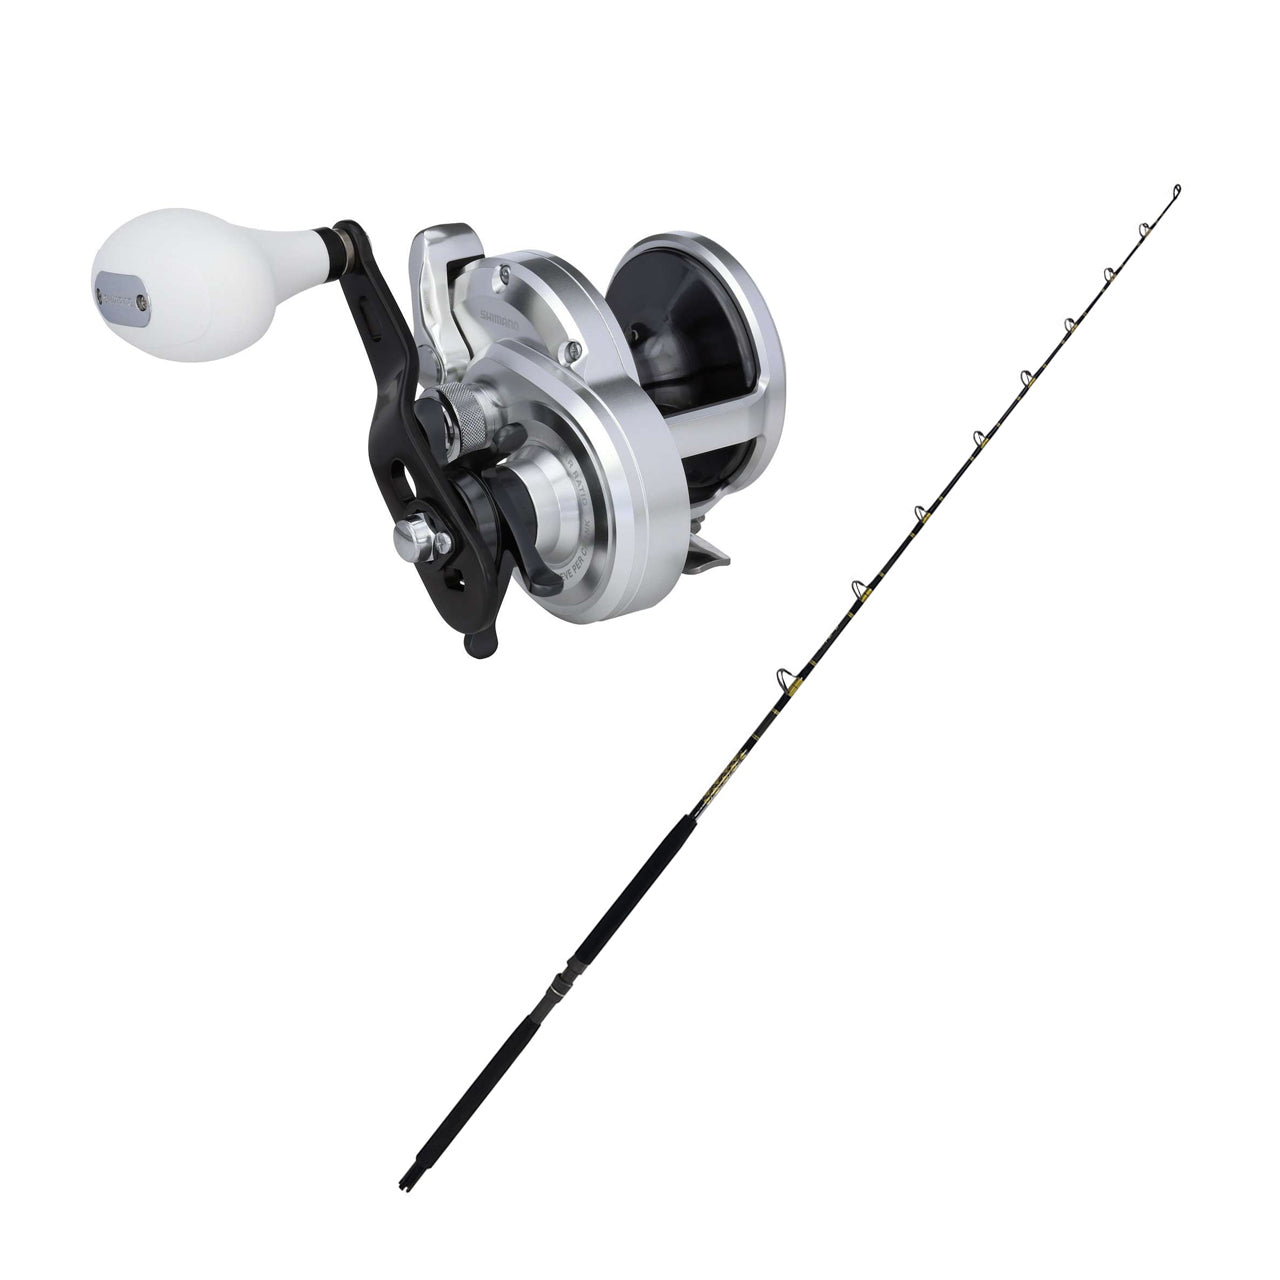 Lee's Rod And Reel Hanger Set - Shimano Tiagra 130 - Bright Gold [MC00 -  Sportfish Outfitters